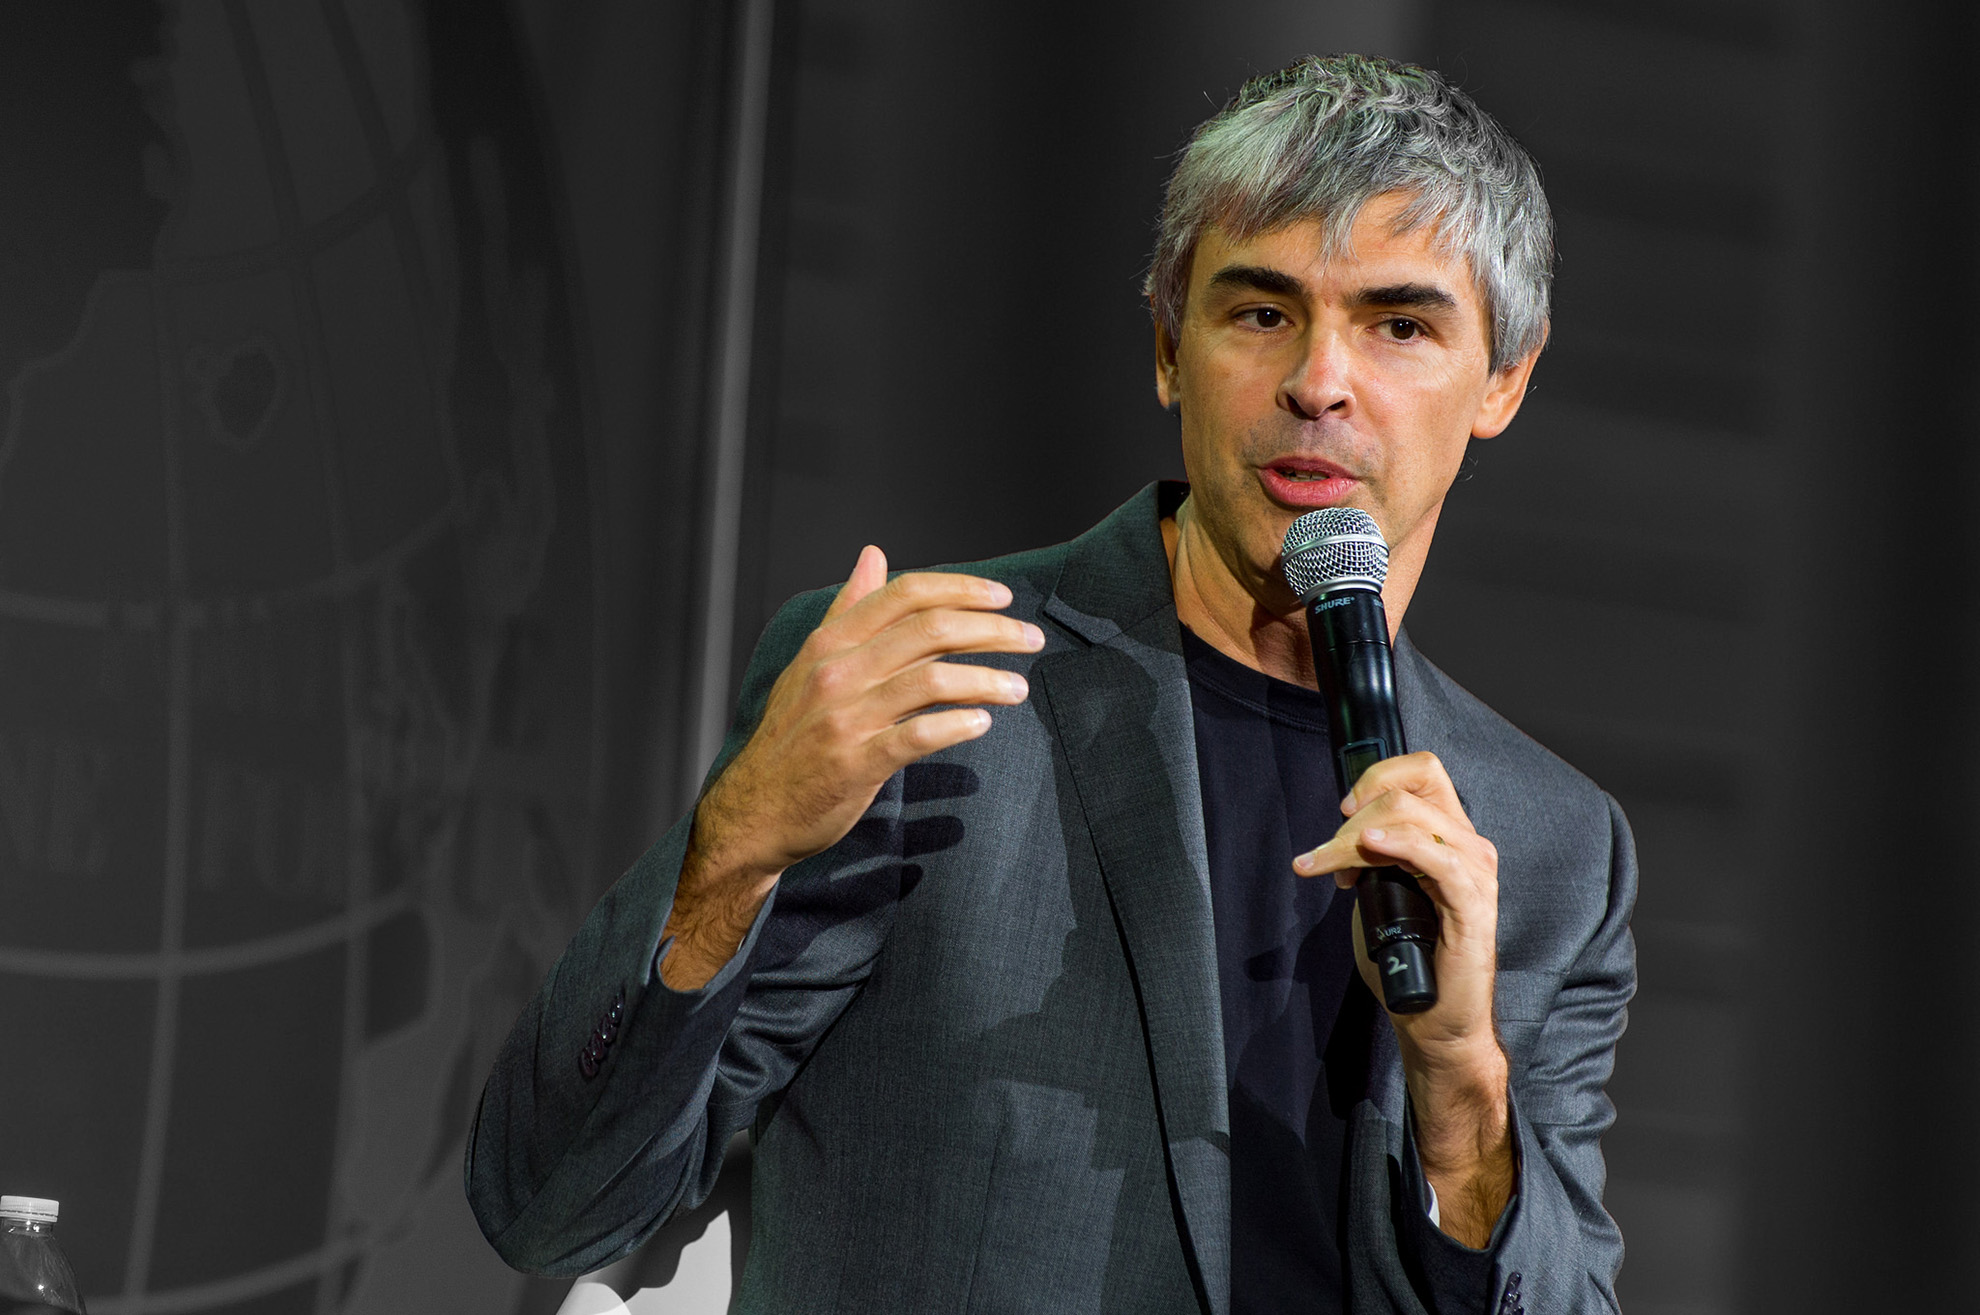 "To do something important, you have to overcome the fear of failure". Google co-founder Larry Page's rules of success